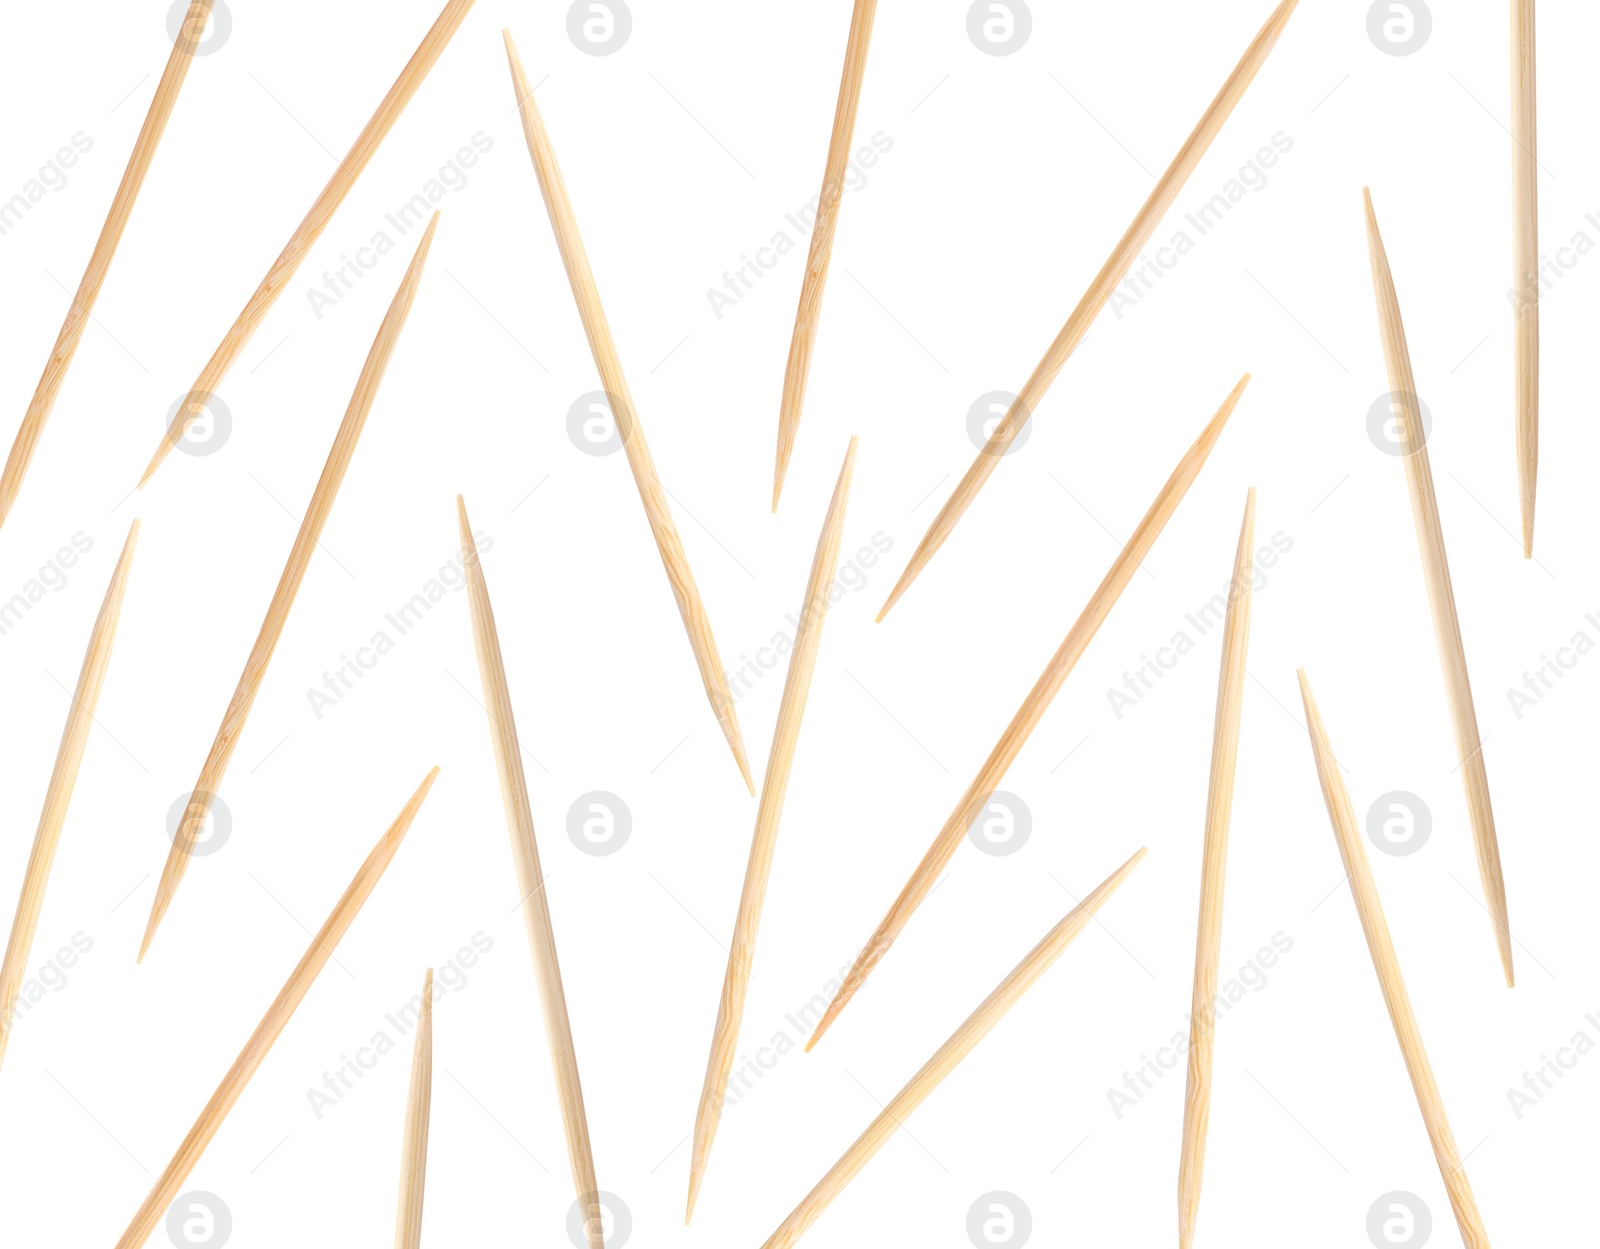 Image of Wooden toothpicks falling on white background, collage